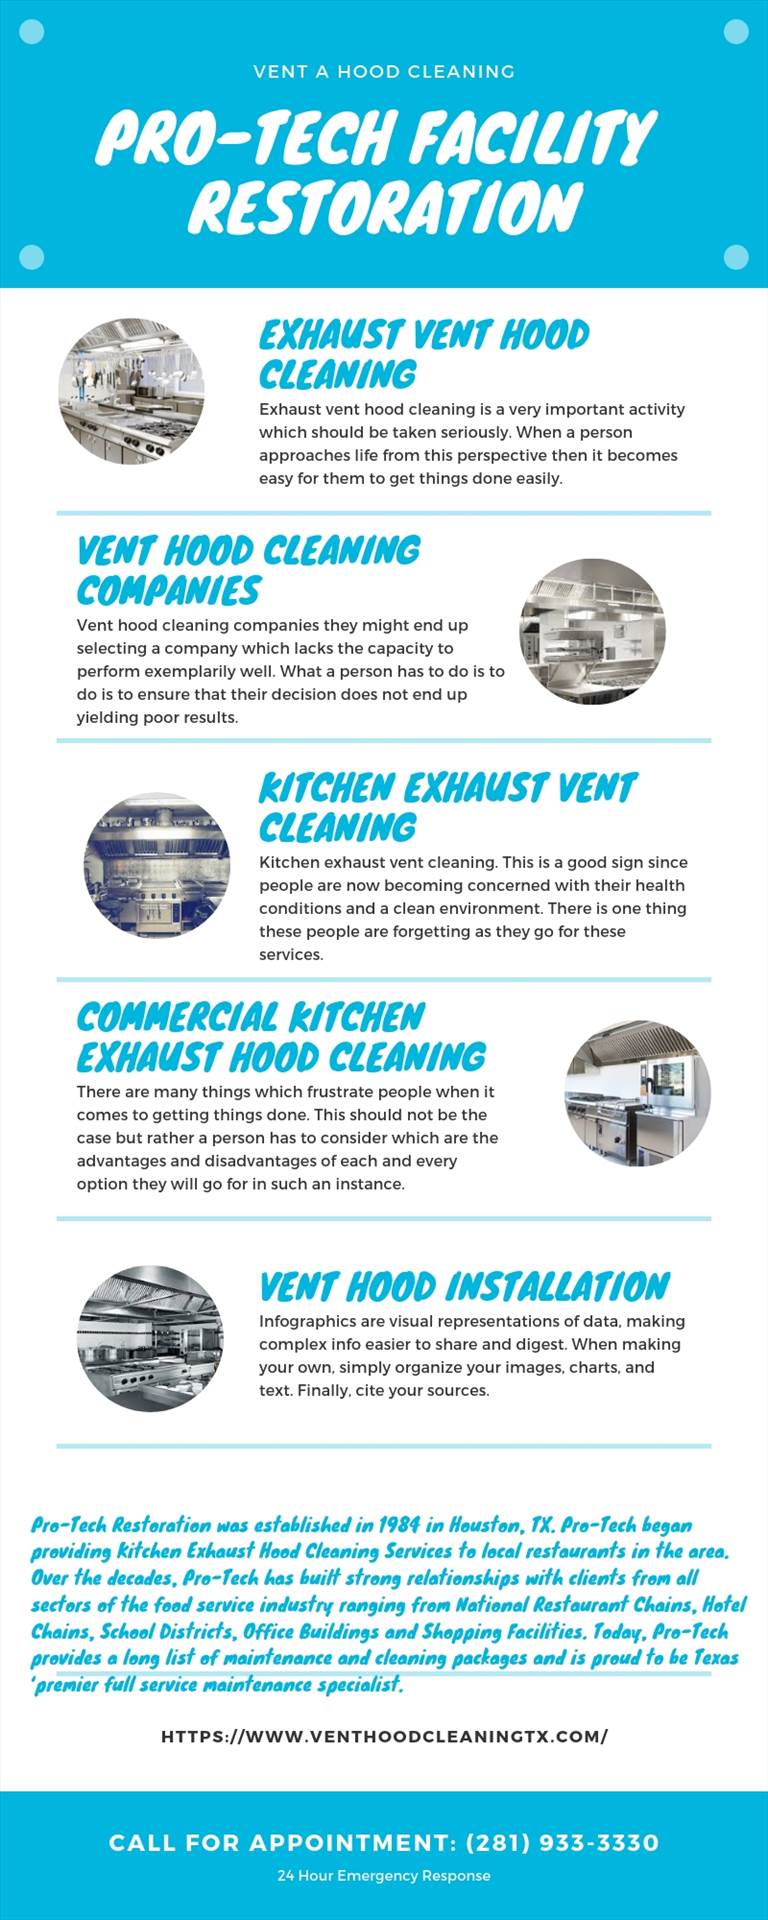 Vent Hood Cleaning Companies.jpg  by Venthoodcleaningtx